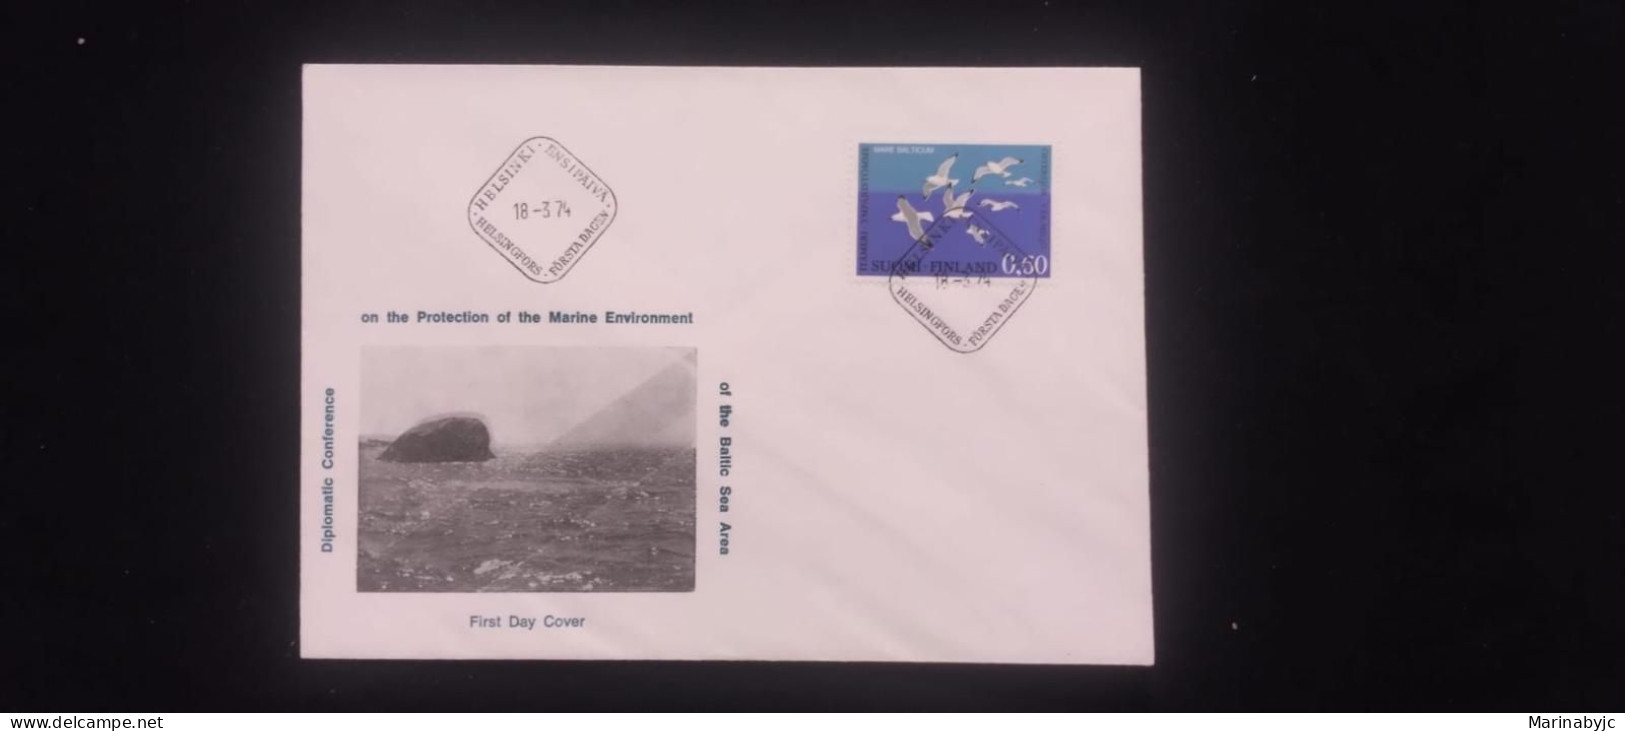 C) 1974. FINLAND. FDC. PROTECTION OF THE MARINE ENVIRONMENT. XF - Europe (Other)